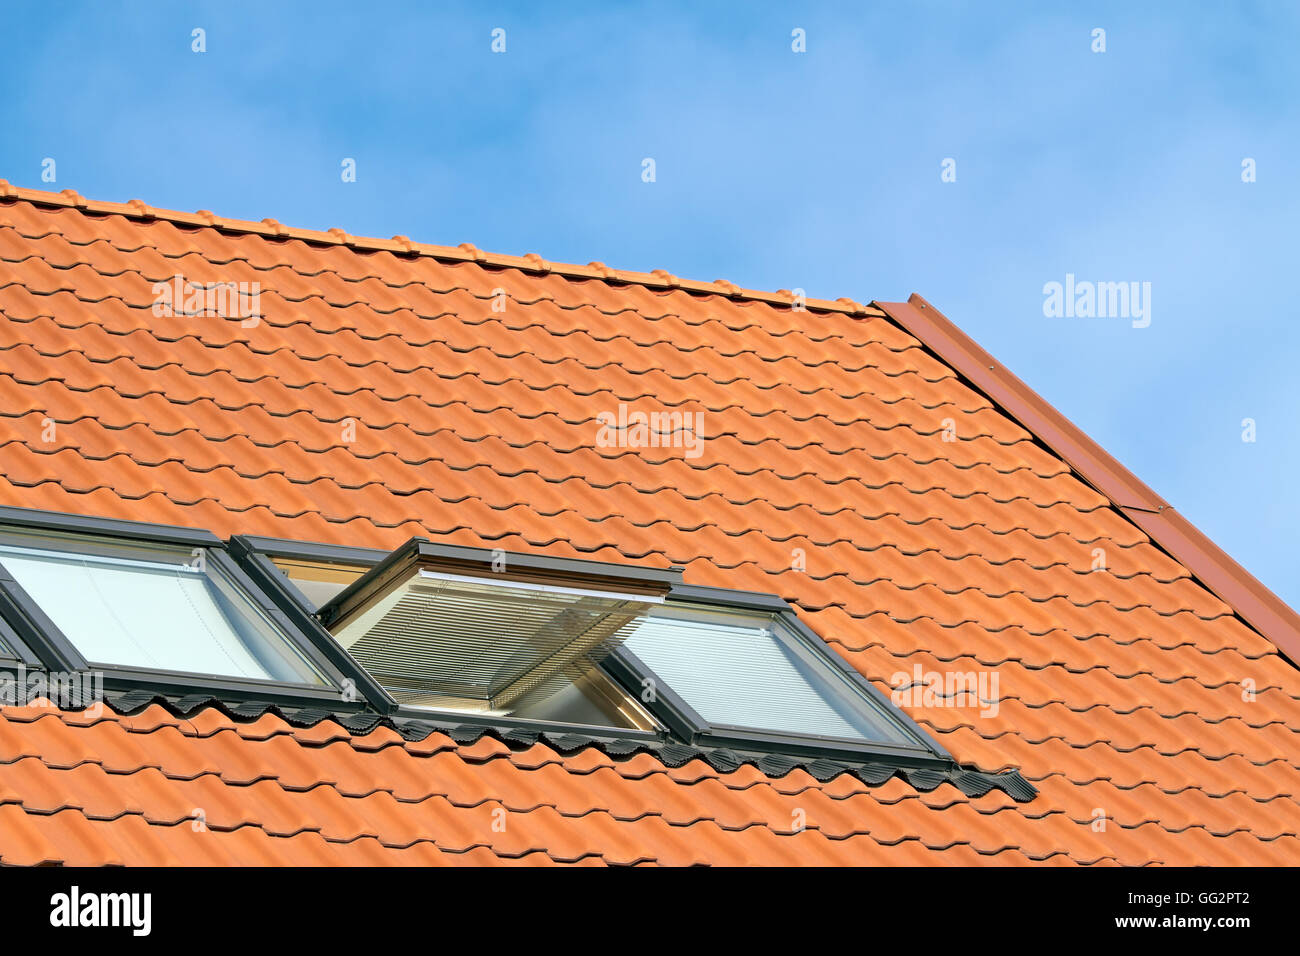 House roof and dormer windows detail Stock Photo